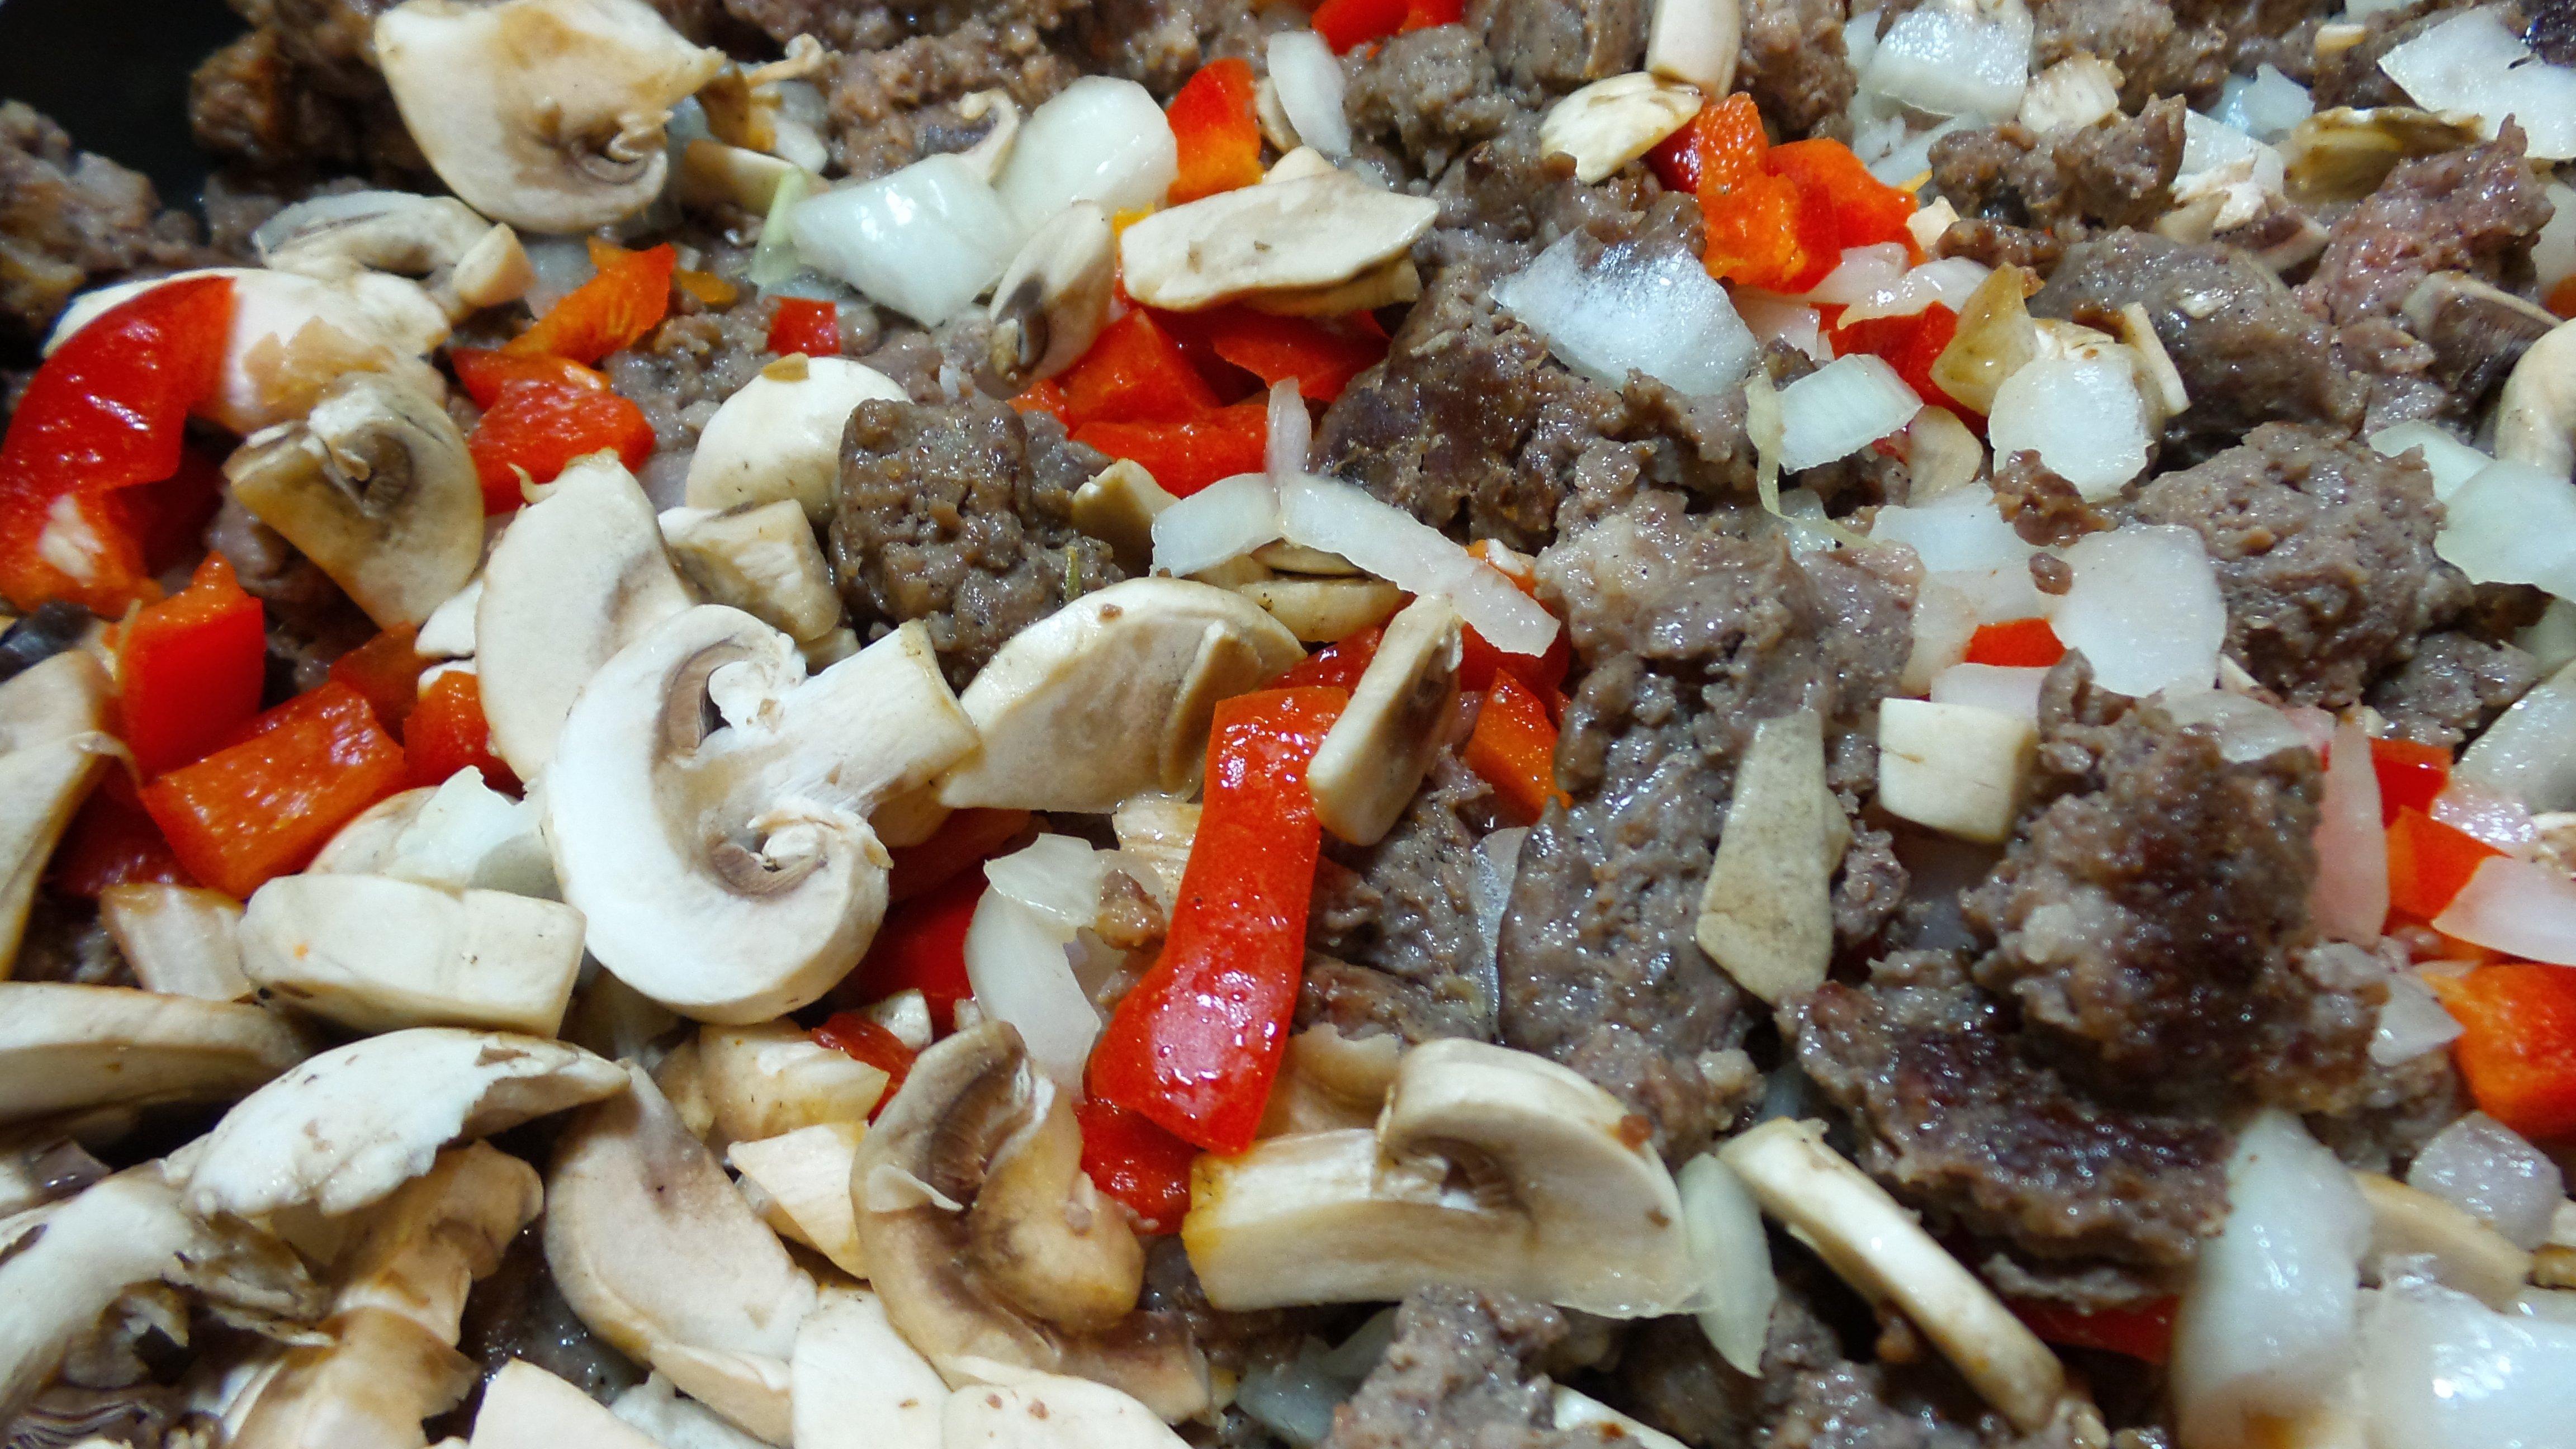 Add the peppers, onions and mushrooms to the browned sausage.